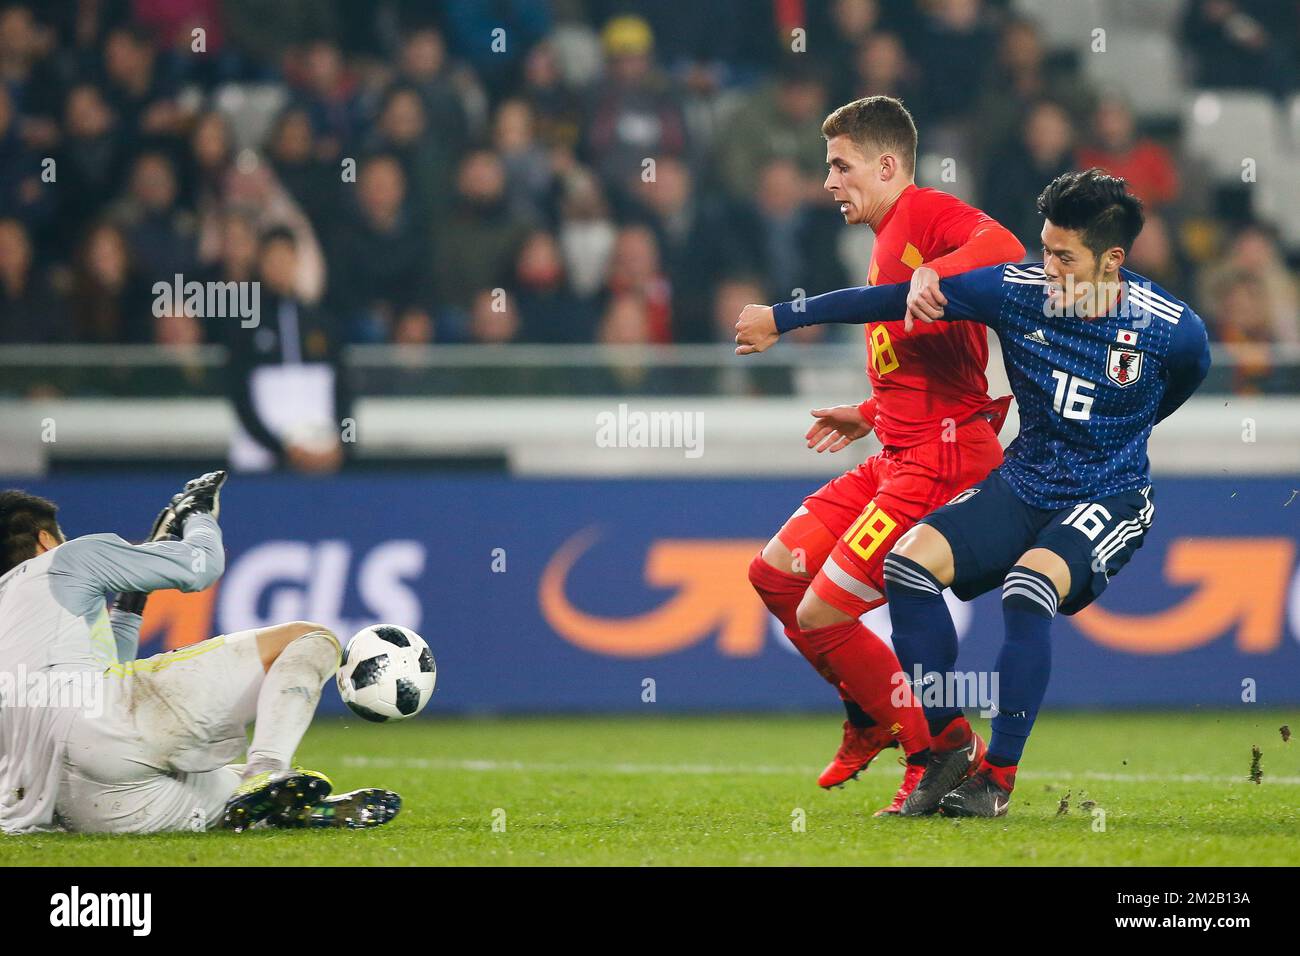 Belgium's Thorgan Hazard and Japan's midfielder Hotaru Yamaguchi fight for the ball during a friendly soccer game between Belgian national team Red Devils and Japan, Tuesday 14 November 2017, in Brugge. BELGA PHOTO BRUNO FAHY Stock Photo